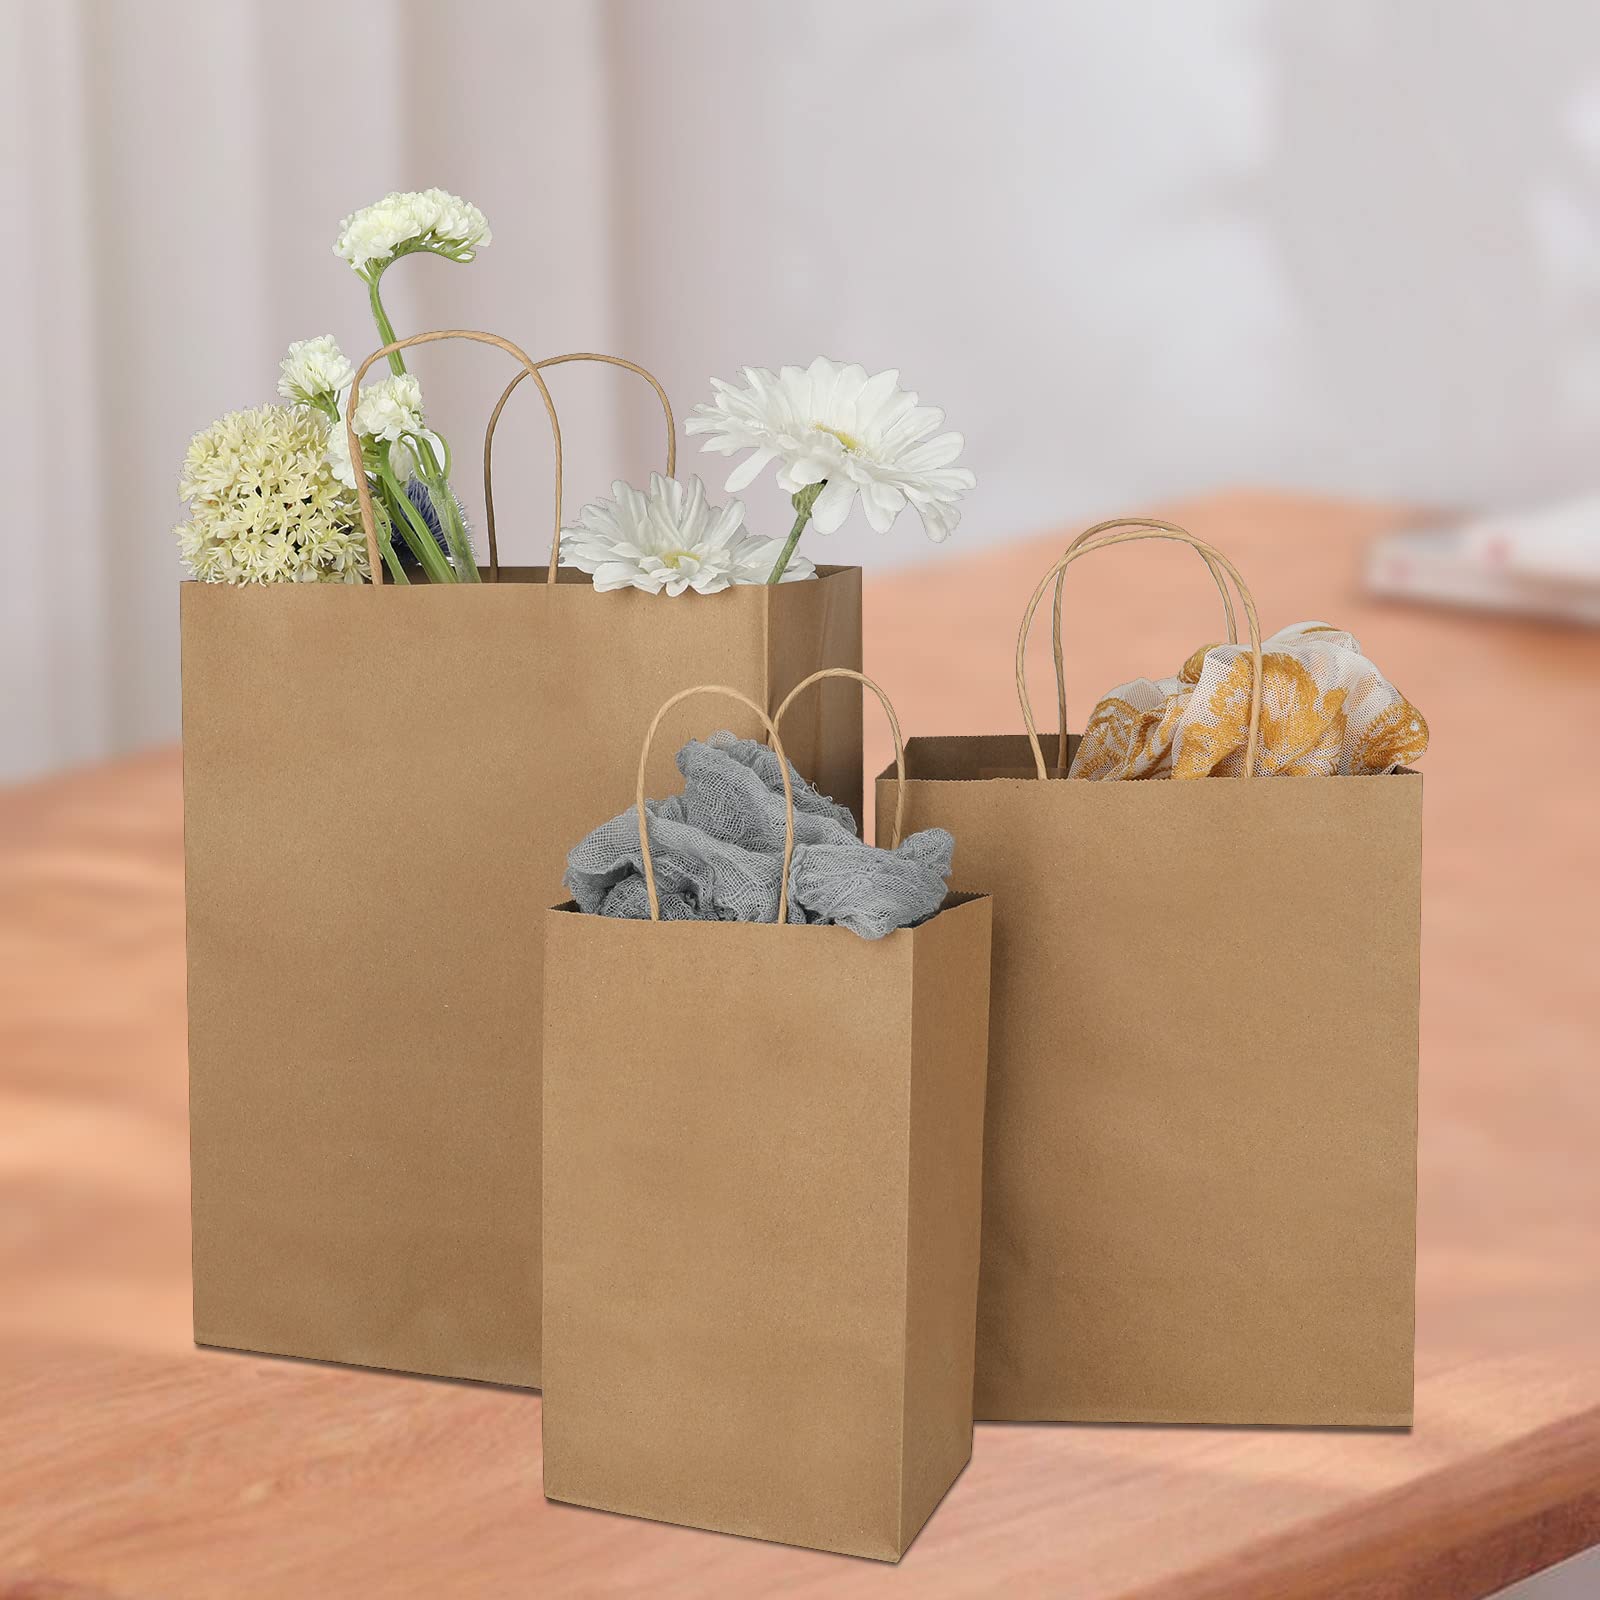 Toovip 90 Pack Plain Brown Kraft Paper Bags with Handles Bulk, Multiple 3 Assorted Sizes Gift Bags for Favors Grocery Retail Party Birthday Shopping Business Goody Craft Merchandise Take Out Sacks